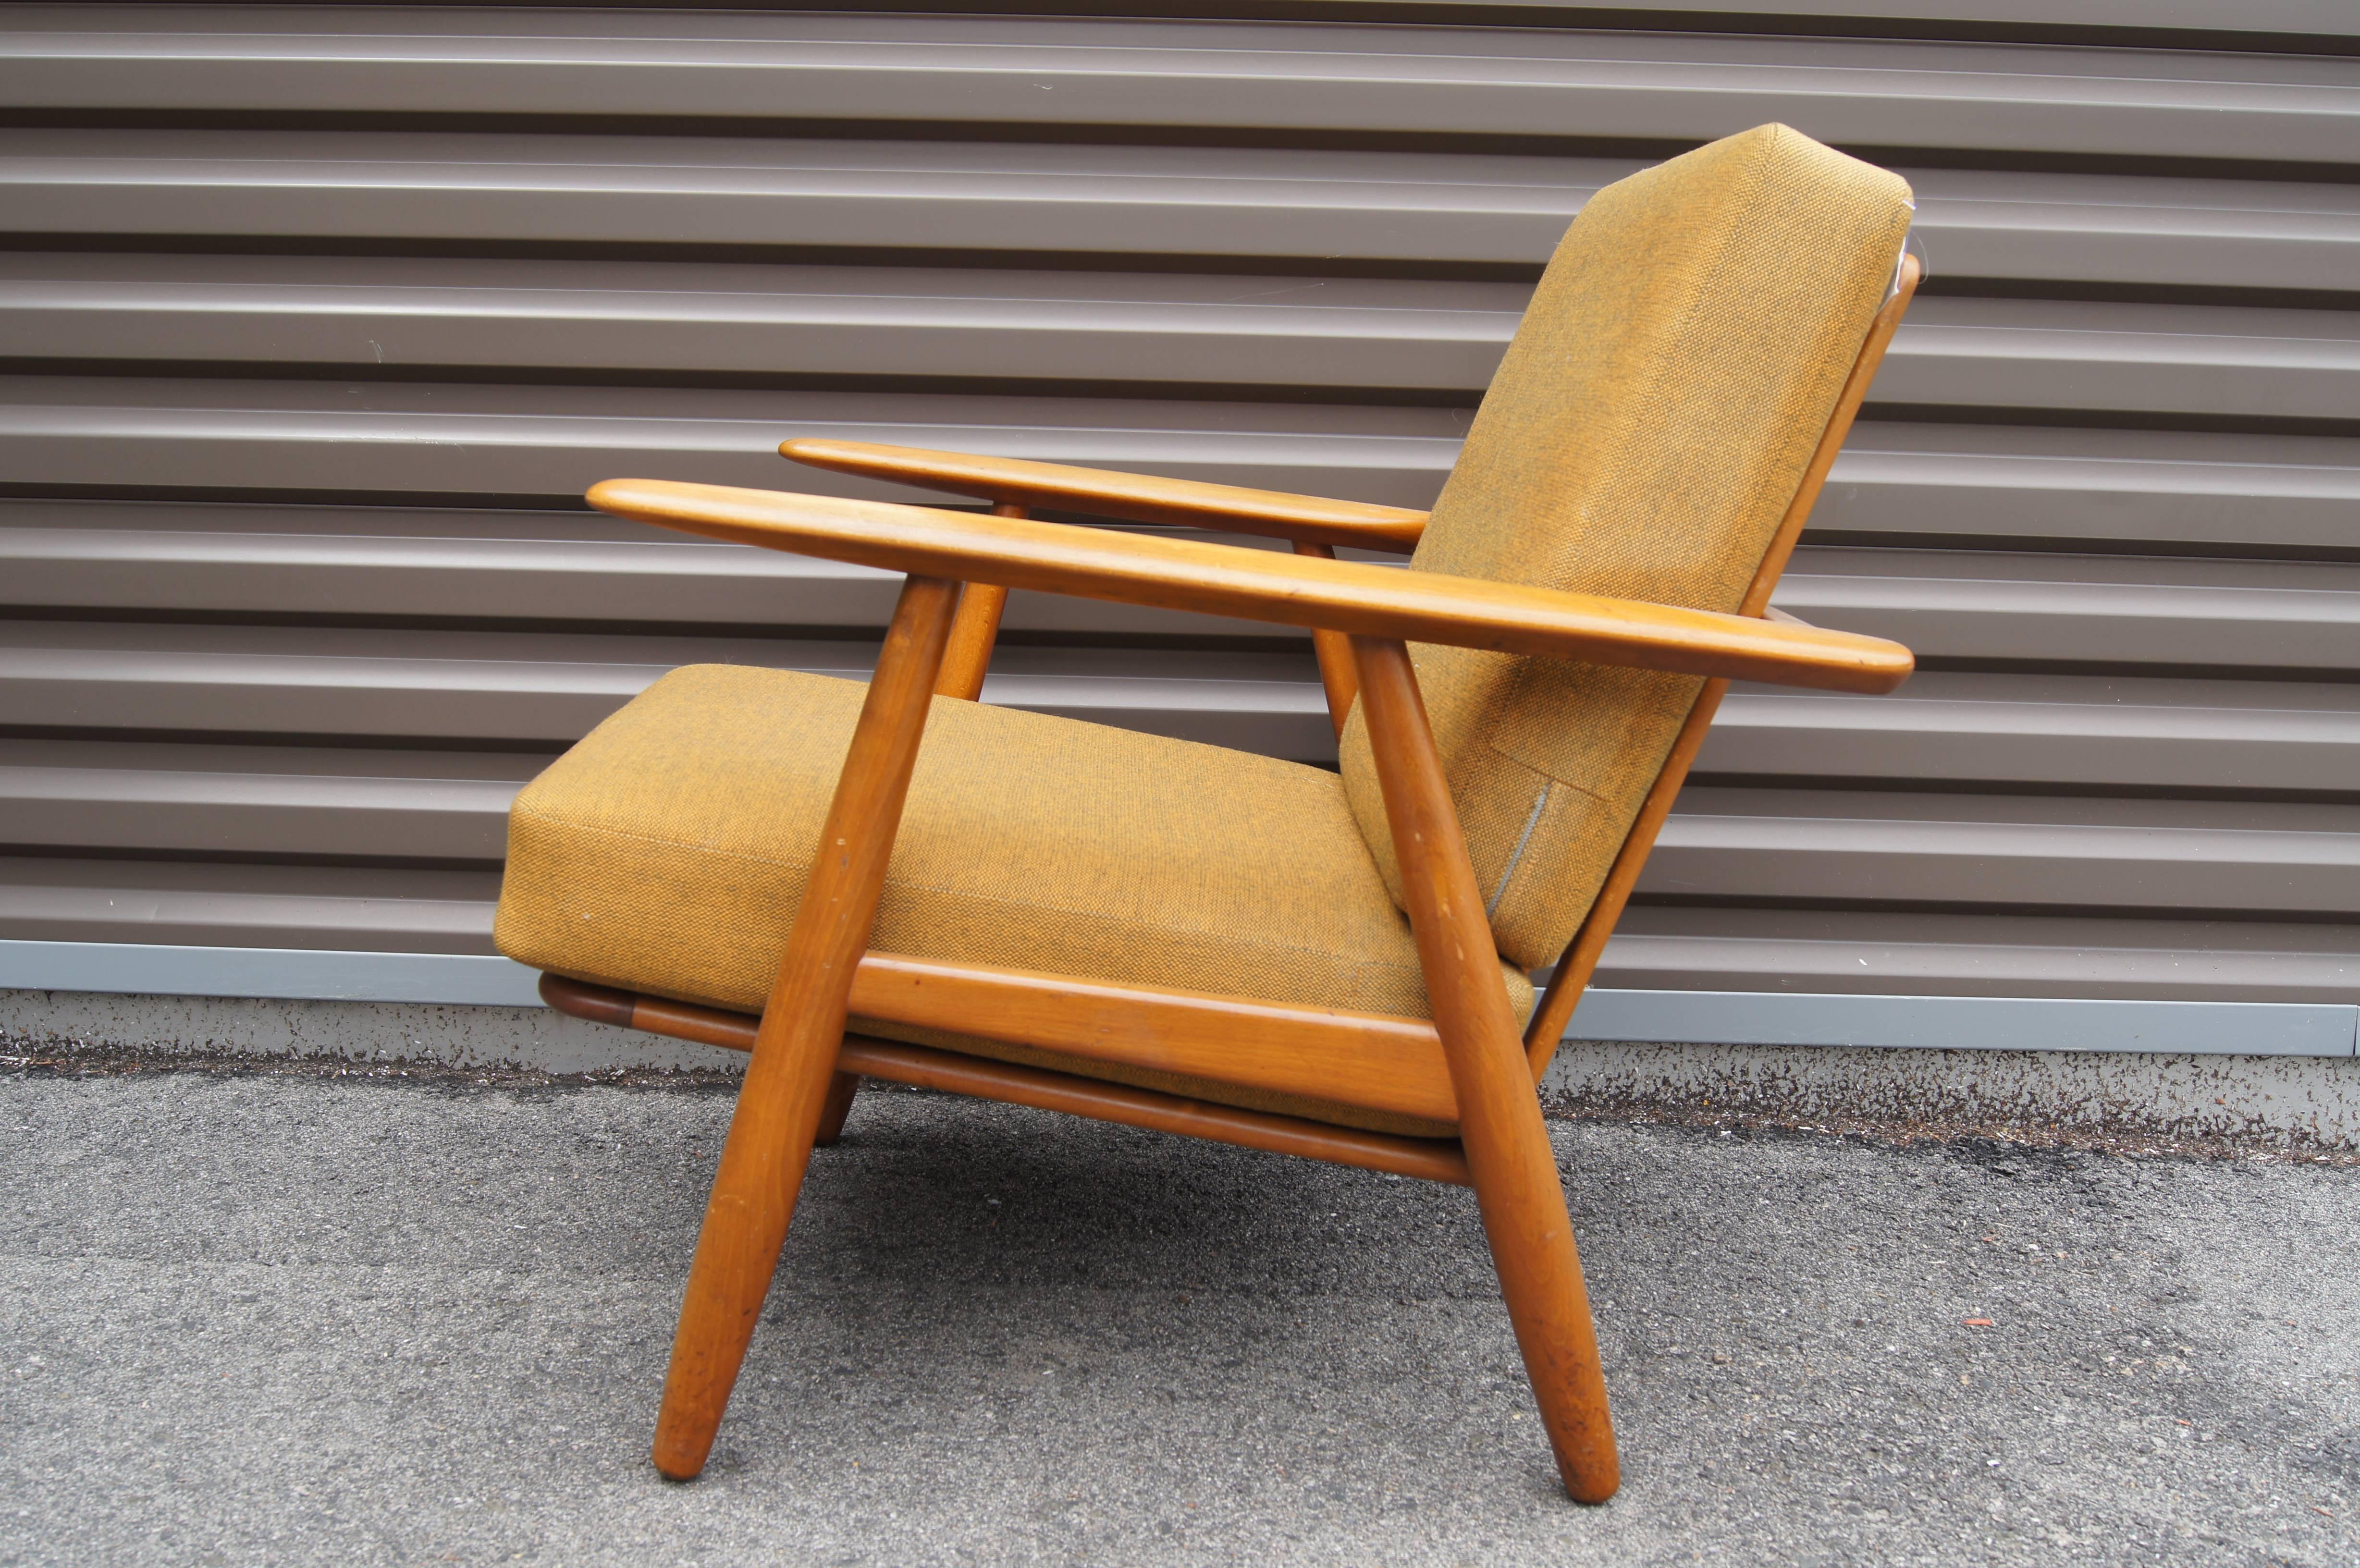 Hans Wegner designed the GE-240 in 1955 for GETAMA. The gently curved lines of the armrests inspired the name Cigar chair. This comfortable lounge chair has a lovely oak frame and its original sprung cushion upholstered in a subtle mustard-colored